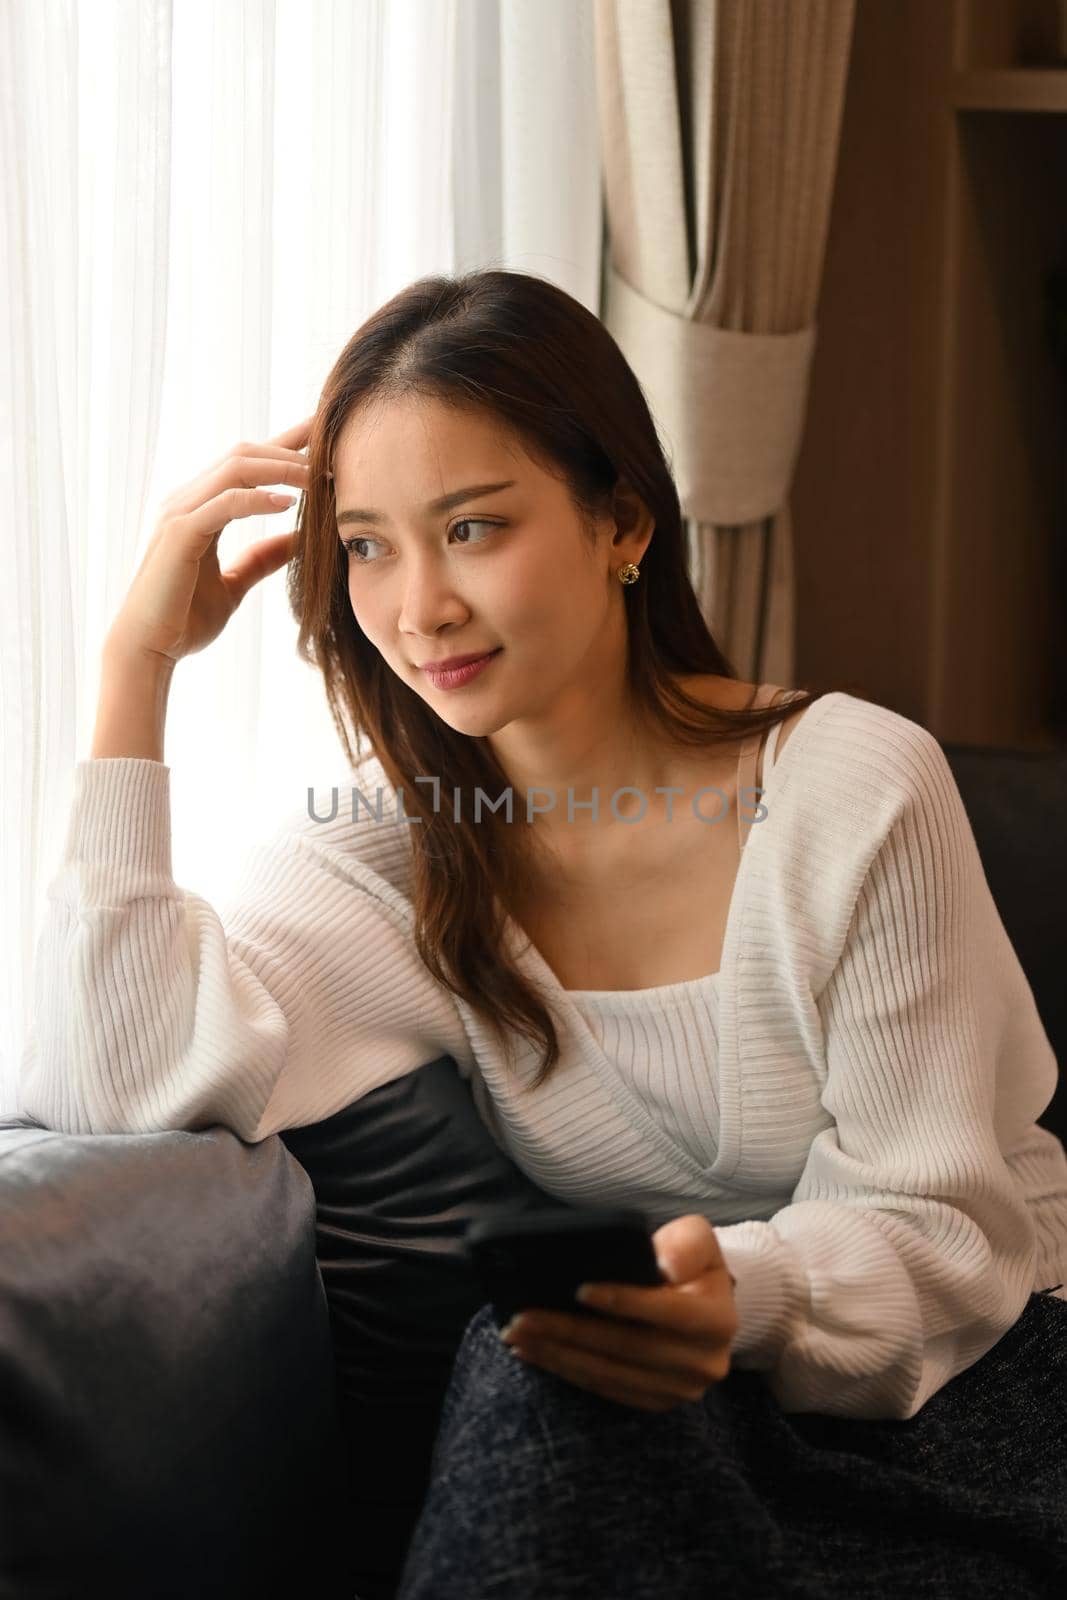 Satisfied young woman resting on couch and using smart phone spending time in winter or autumn weekend.